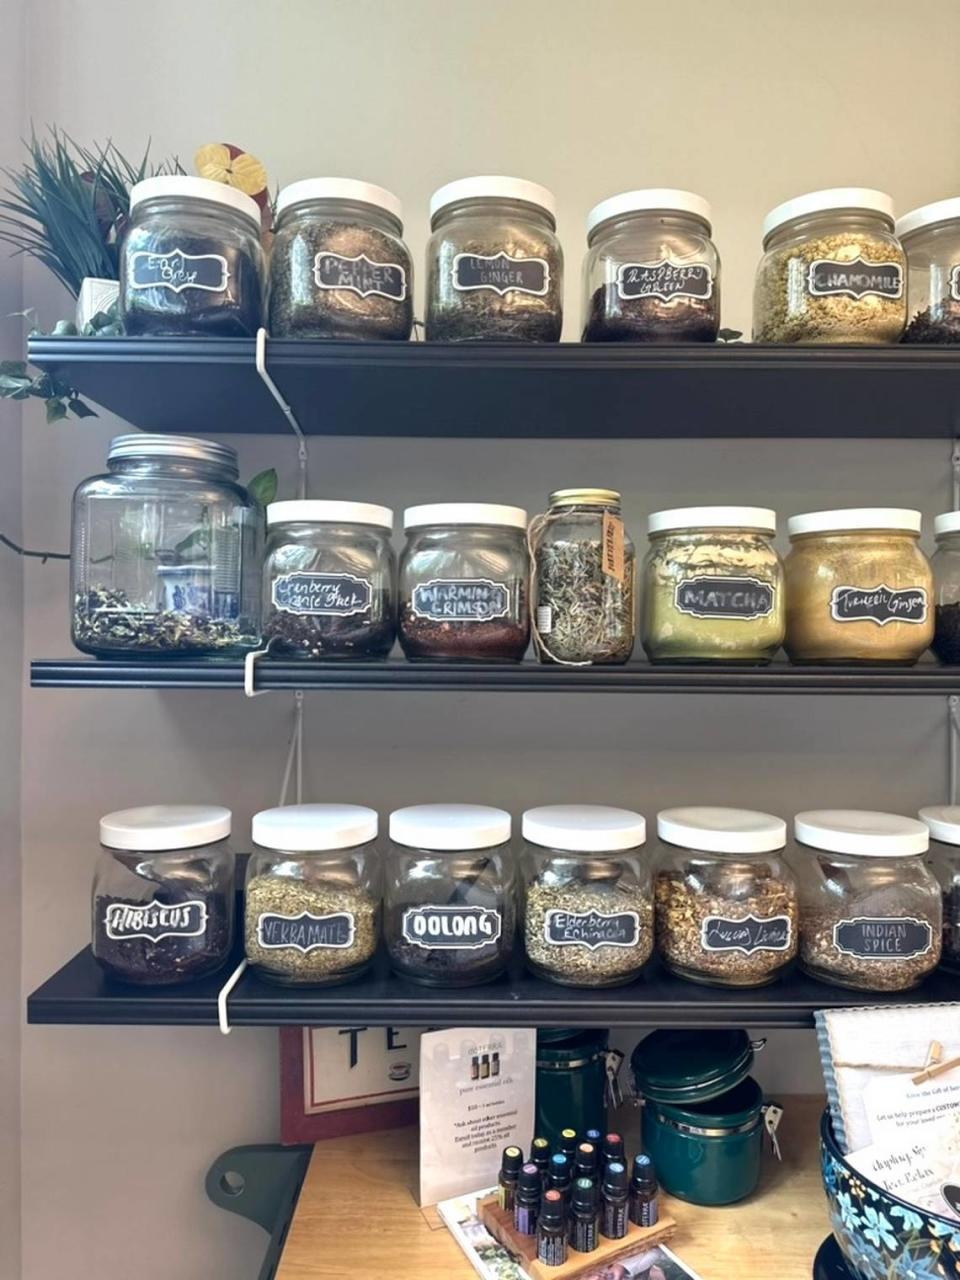 The Pauline Tea-Bar Apothecary is known for its loose-leaf tea selection and its locally-sourced pastries and sandwiches.